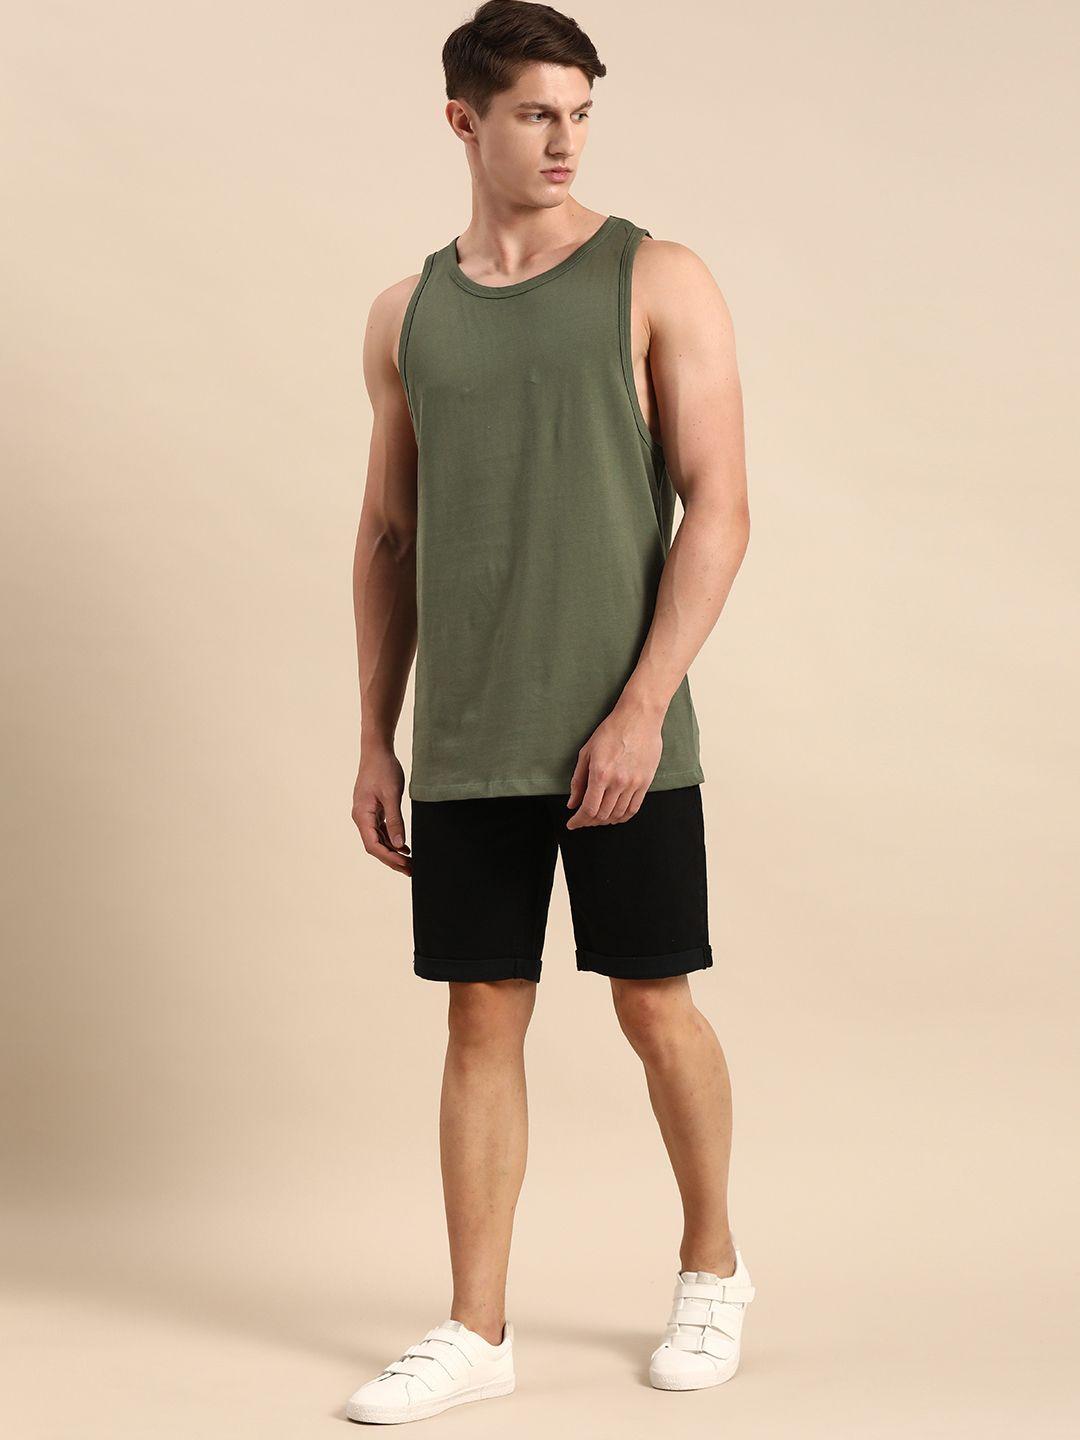 ether men olive green solid round neck sleeveless pure cotton t-shirt